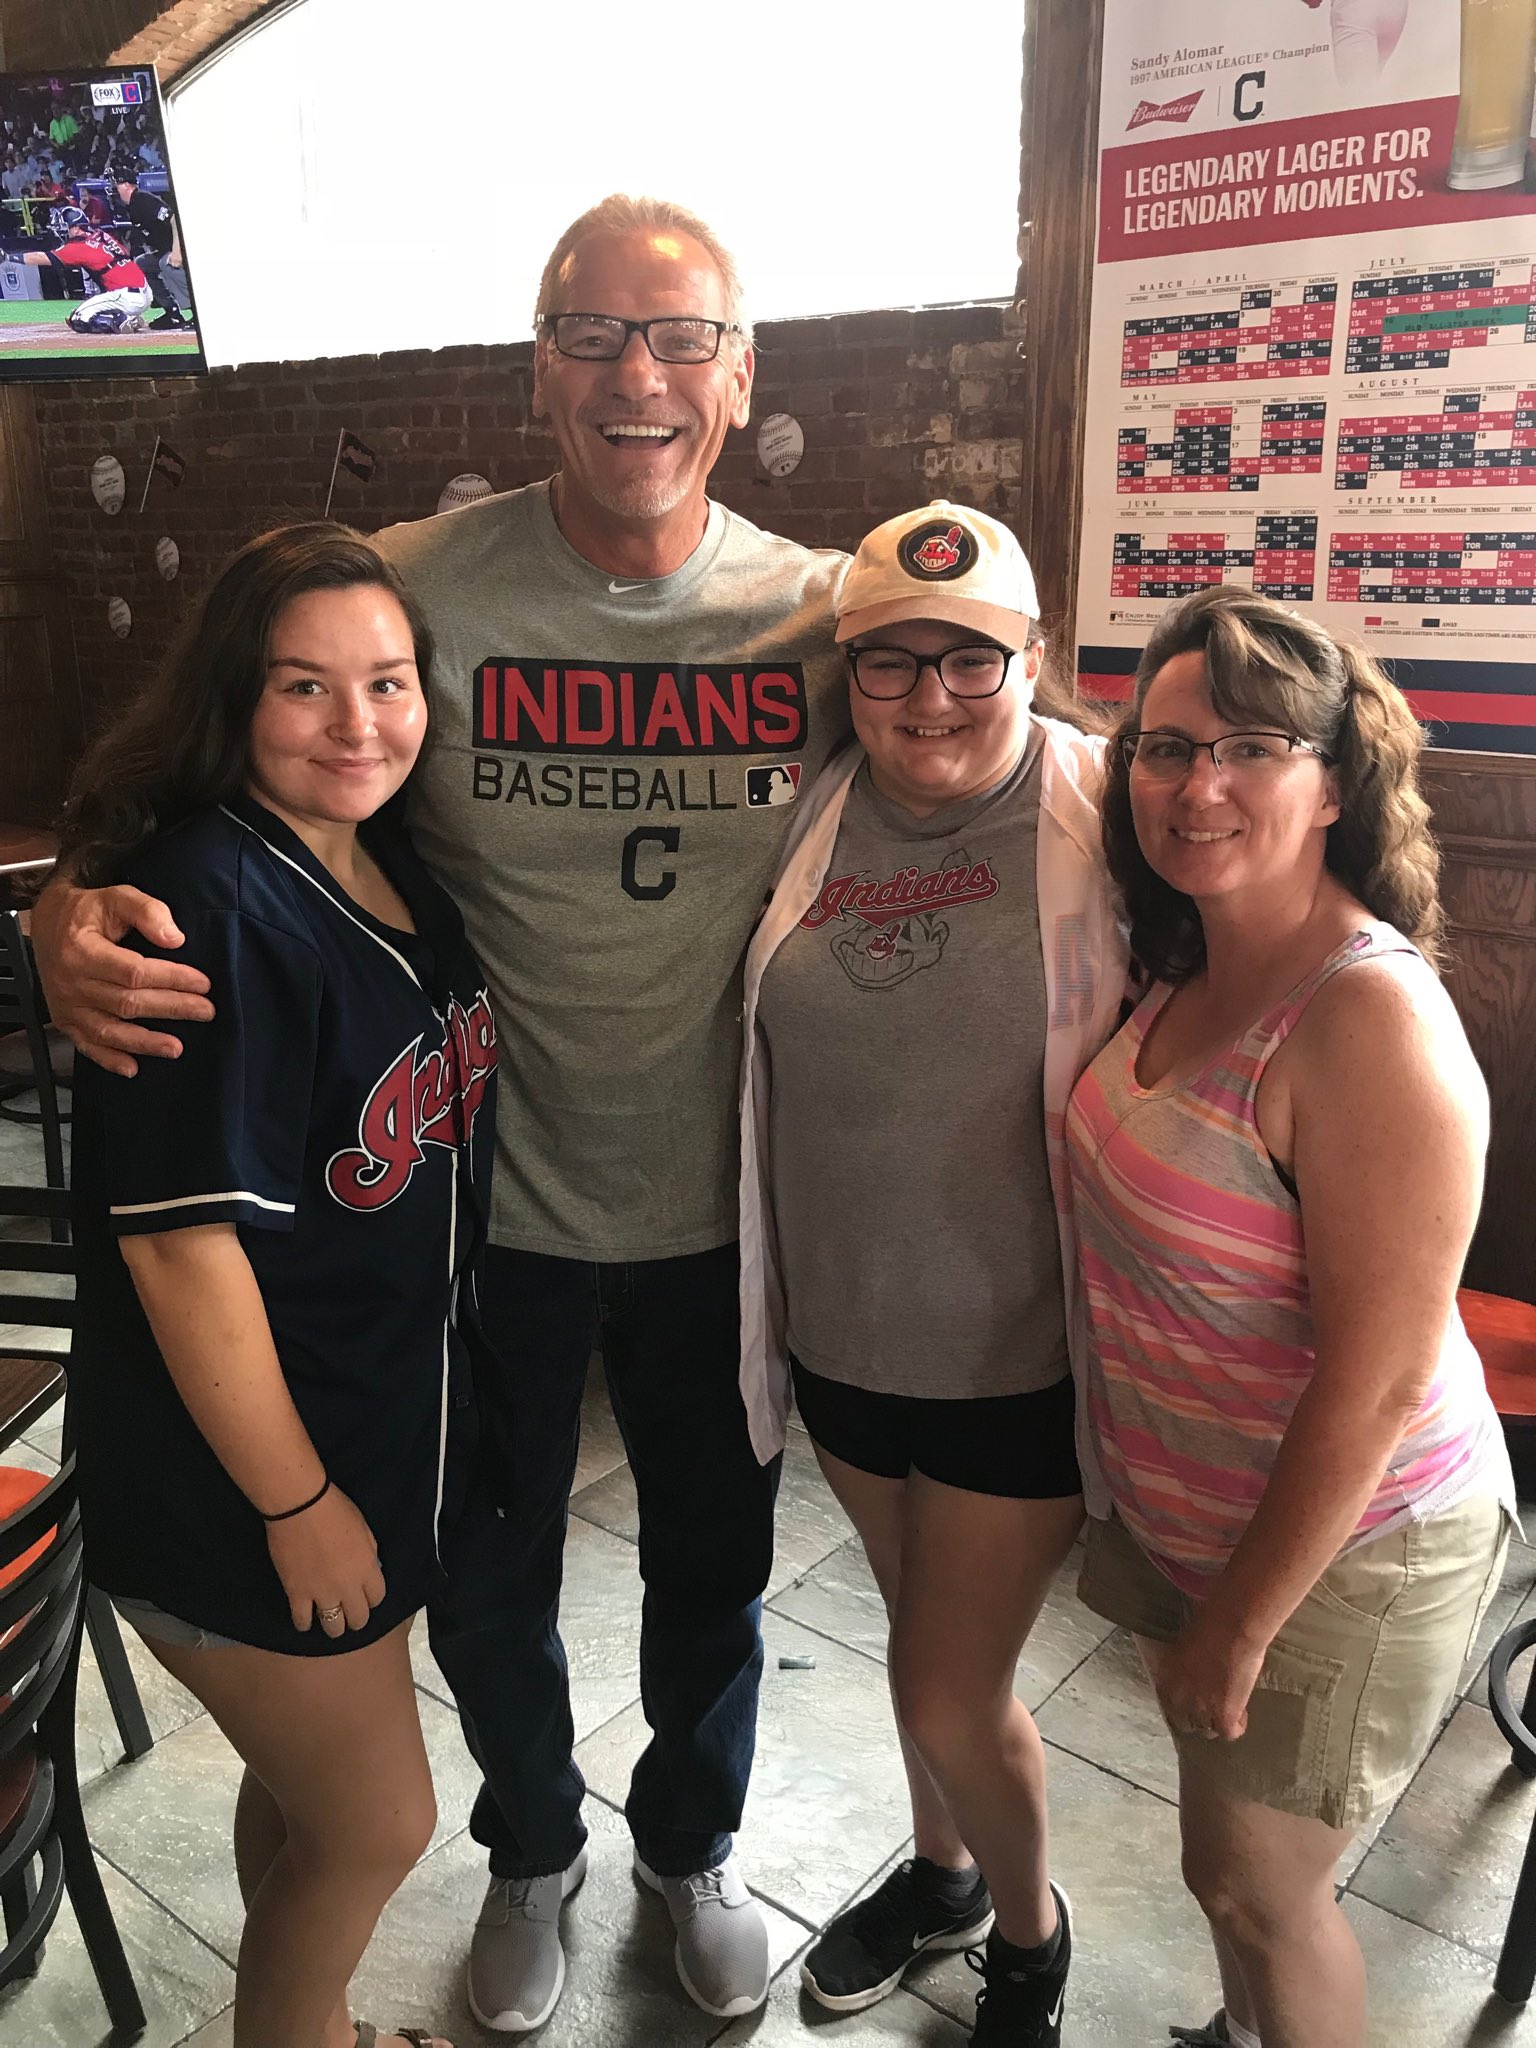 Brian Kazy on X: Pre game ⁦@Indians⁩ game and run into the 1980